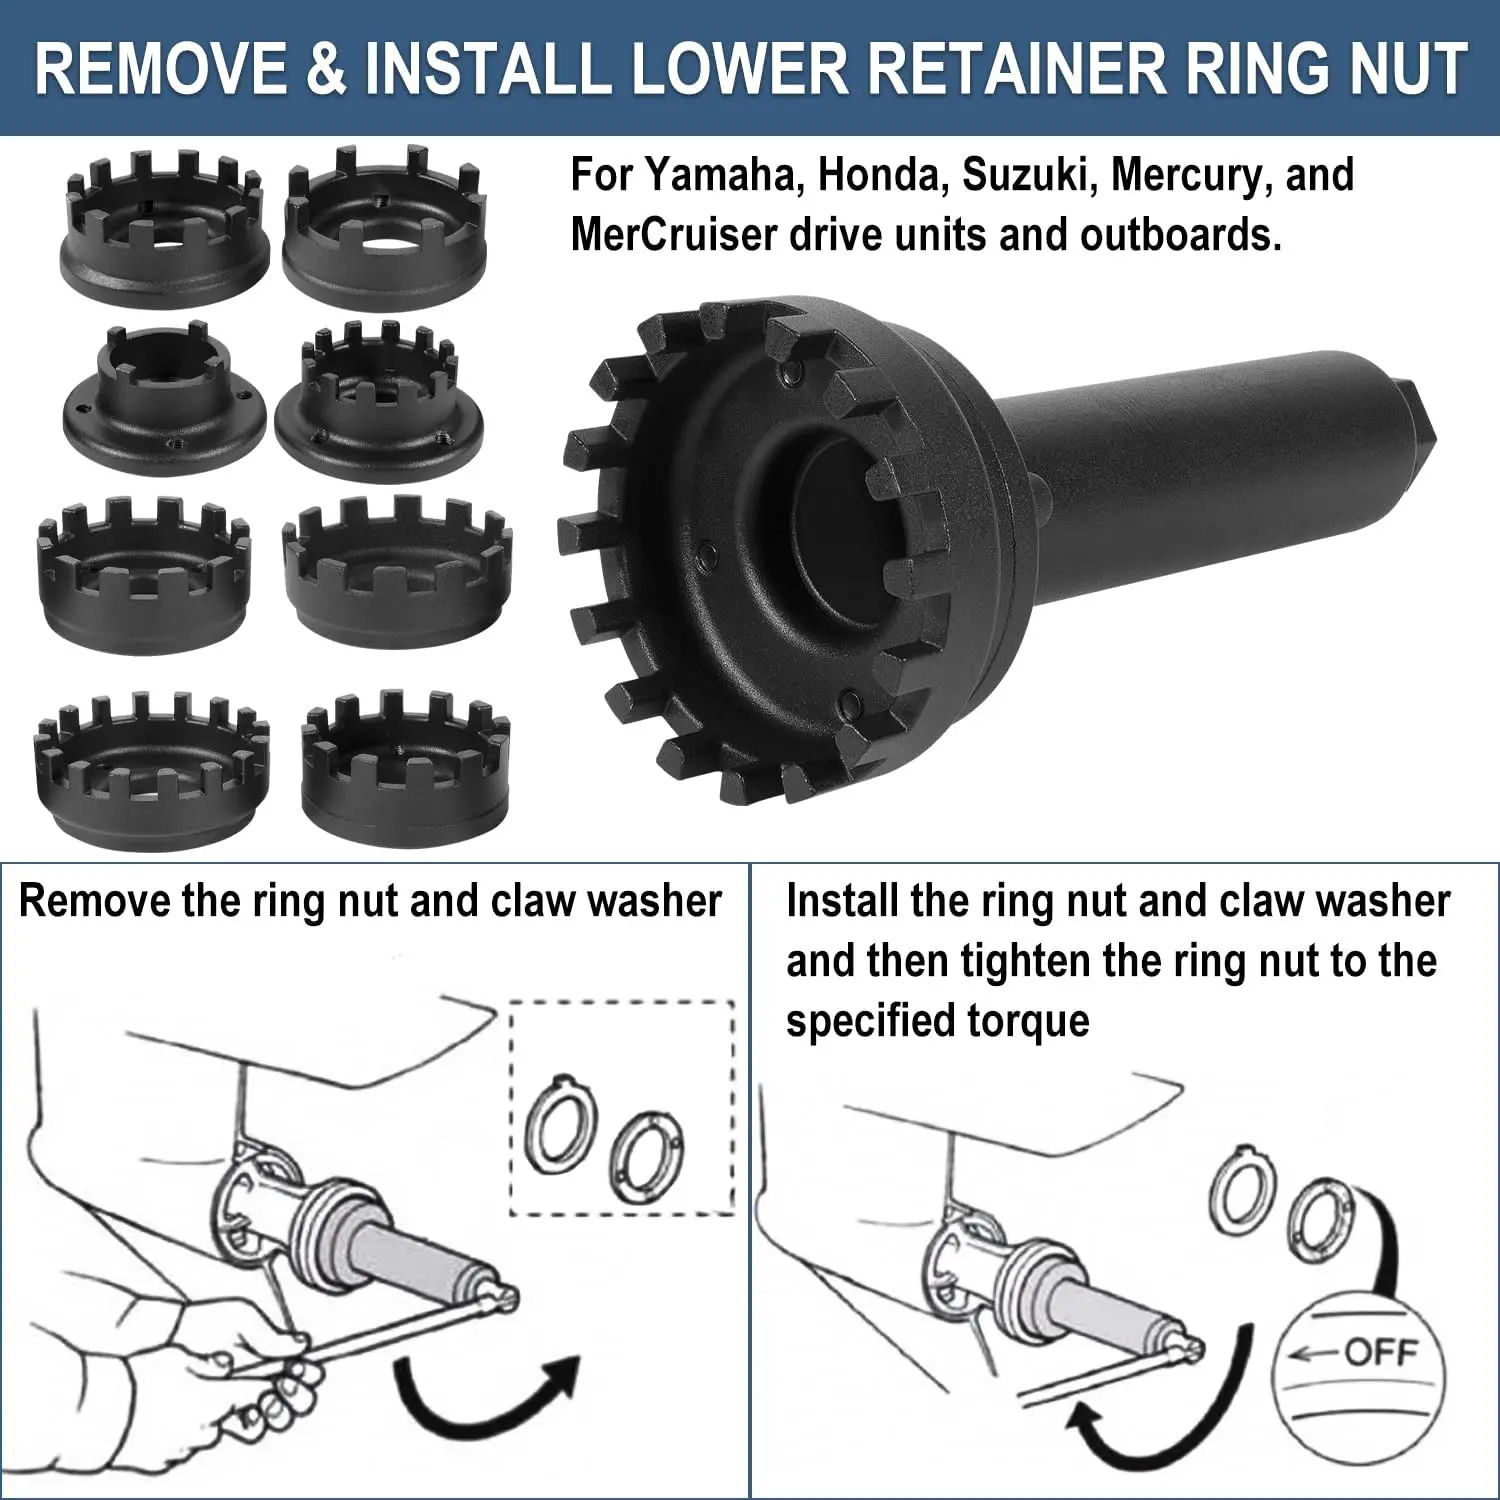 Lower Carrier Retainer Retaining Ring Nut Wrench Tool Kit Fit For Yamaha Honda Suzuki Mercury MerCruiser Drive Units & Outboards enlarge